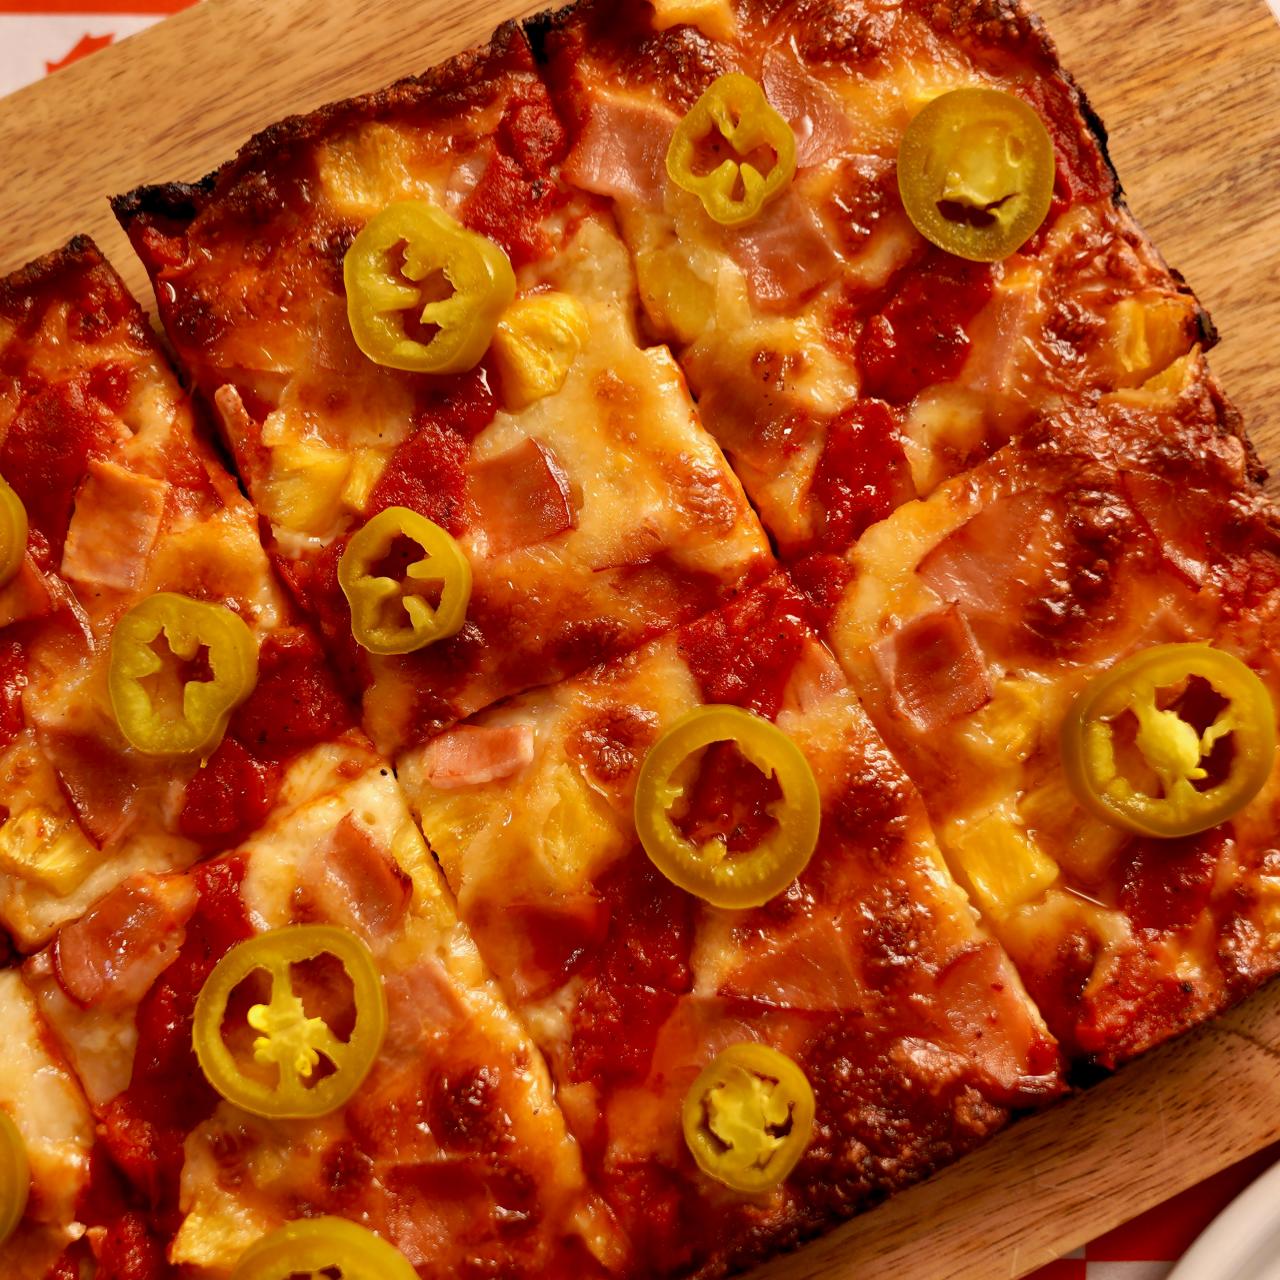 Adobe Reveals Pineapple Pizza Opinions and Offers New Recipe Ideas